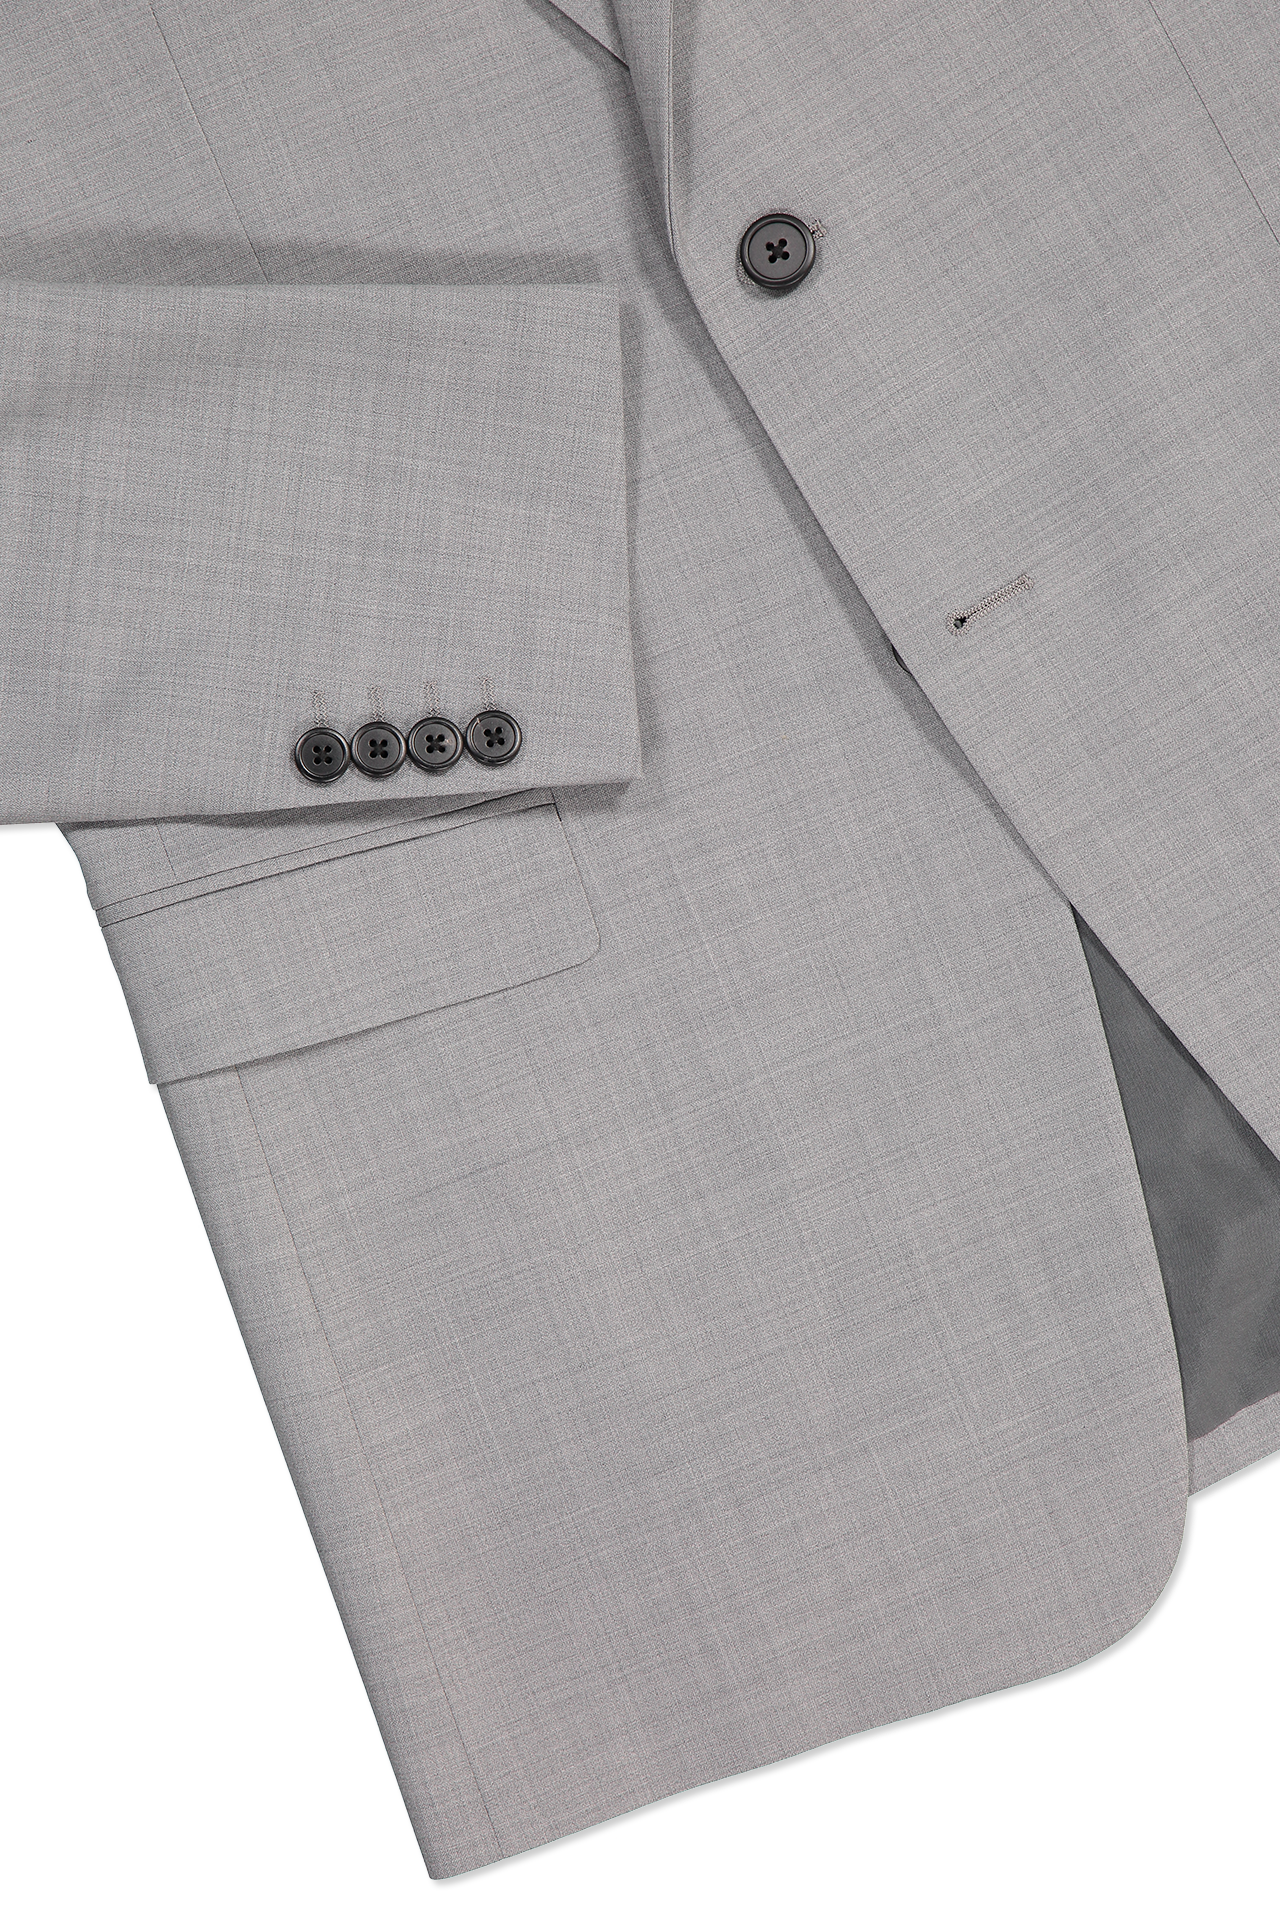 Theory Chambers New Tailor Suit Jacket Cuff Detail Image (1737077260403)